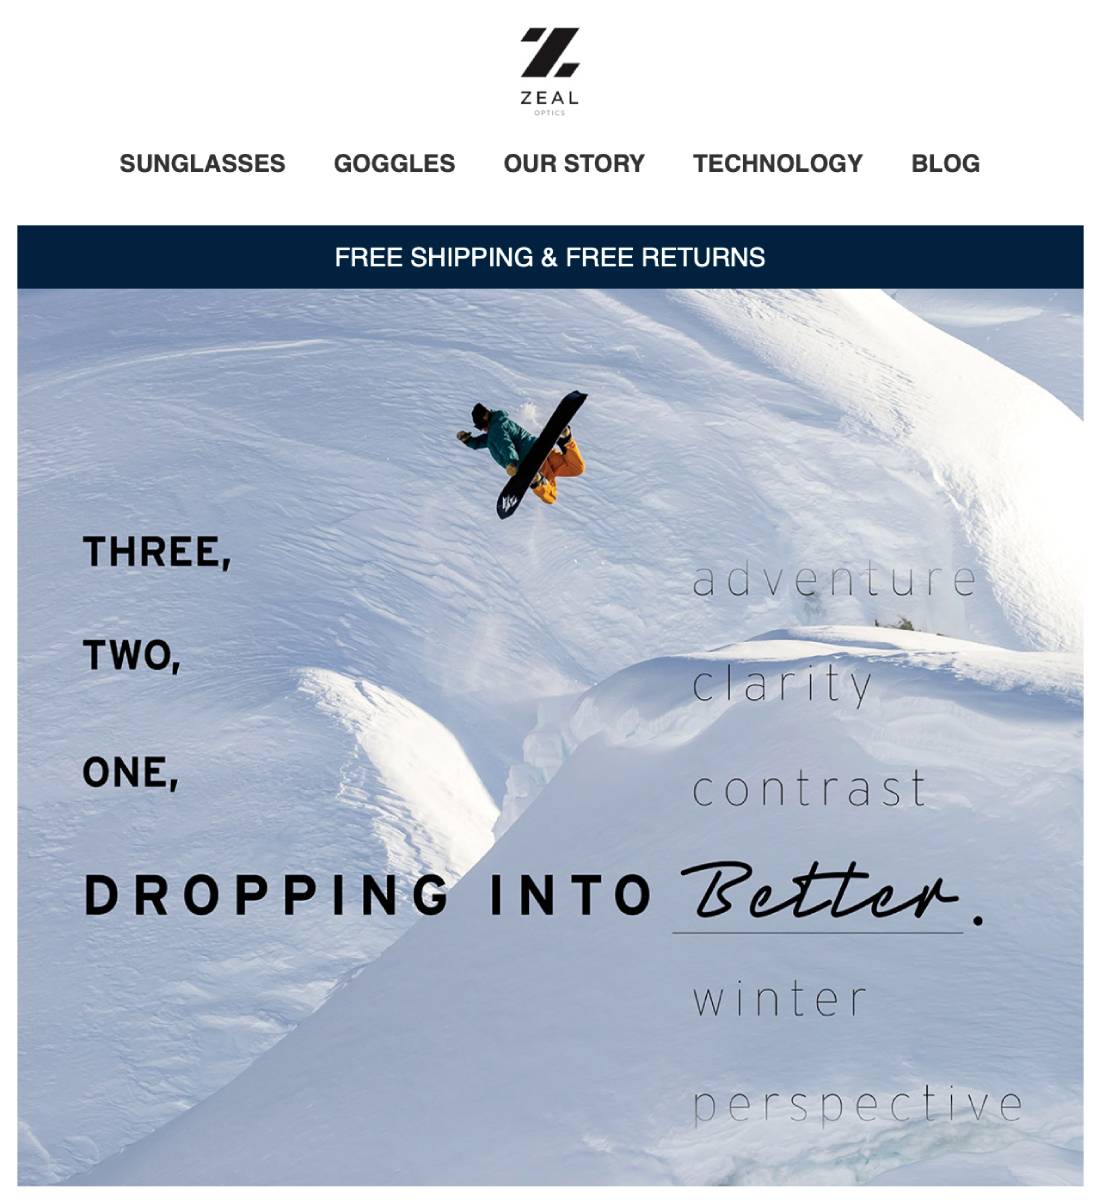 Tearsheet of a snowboarder doing an extreme jump.